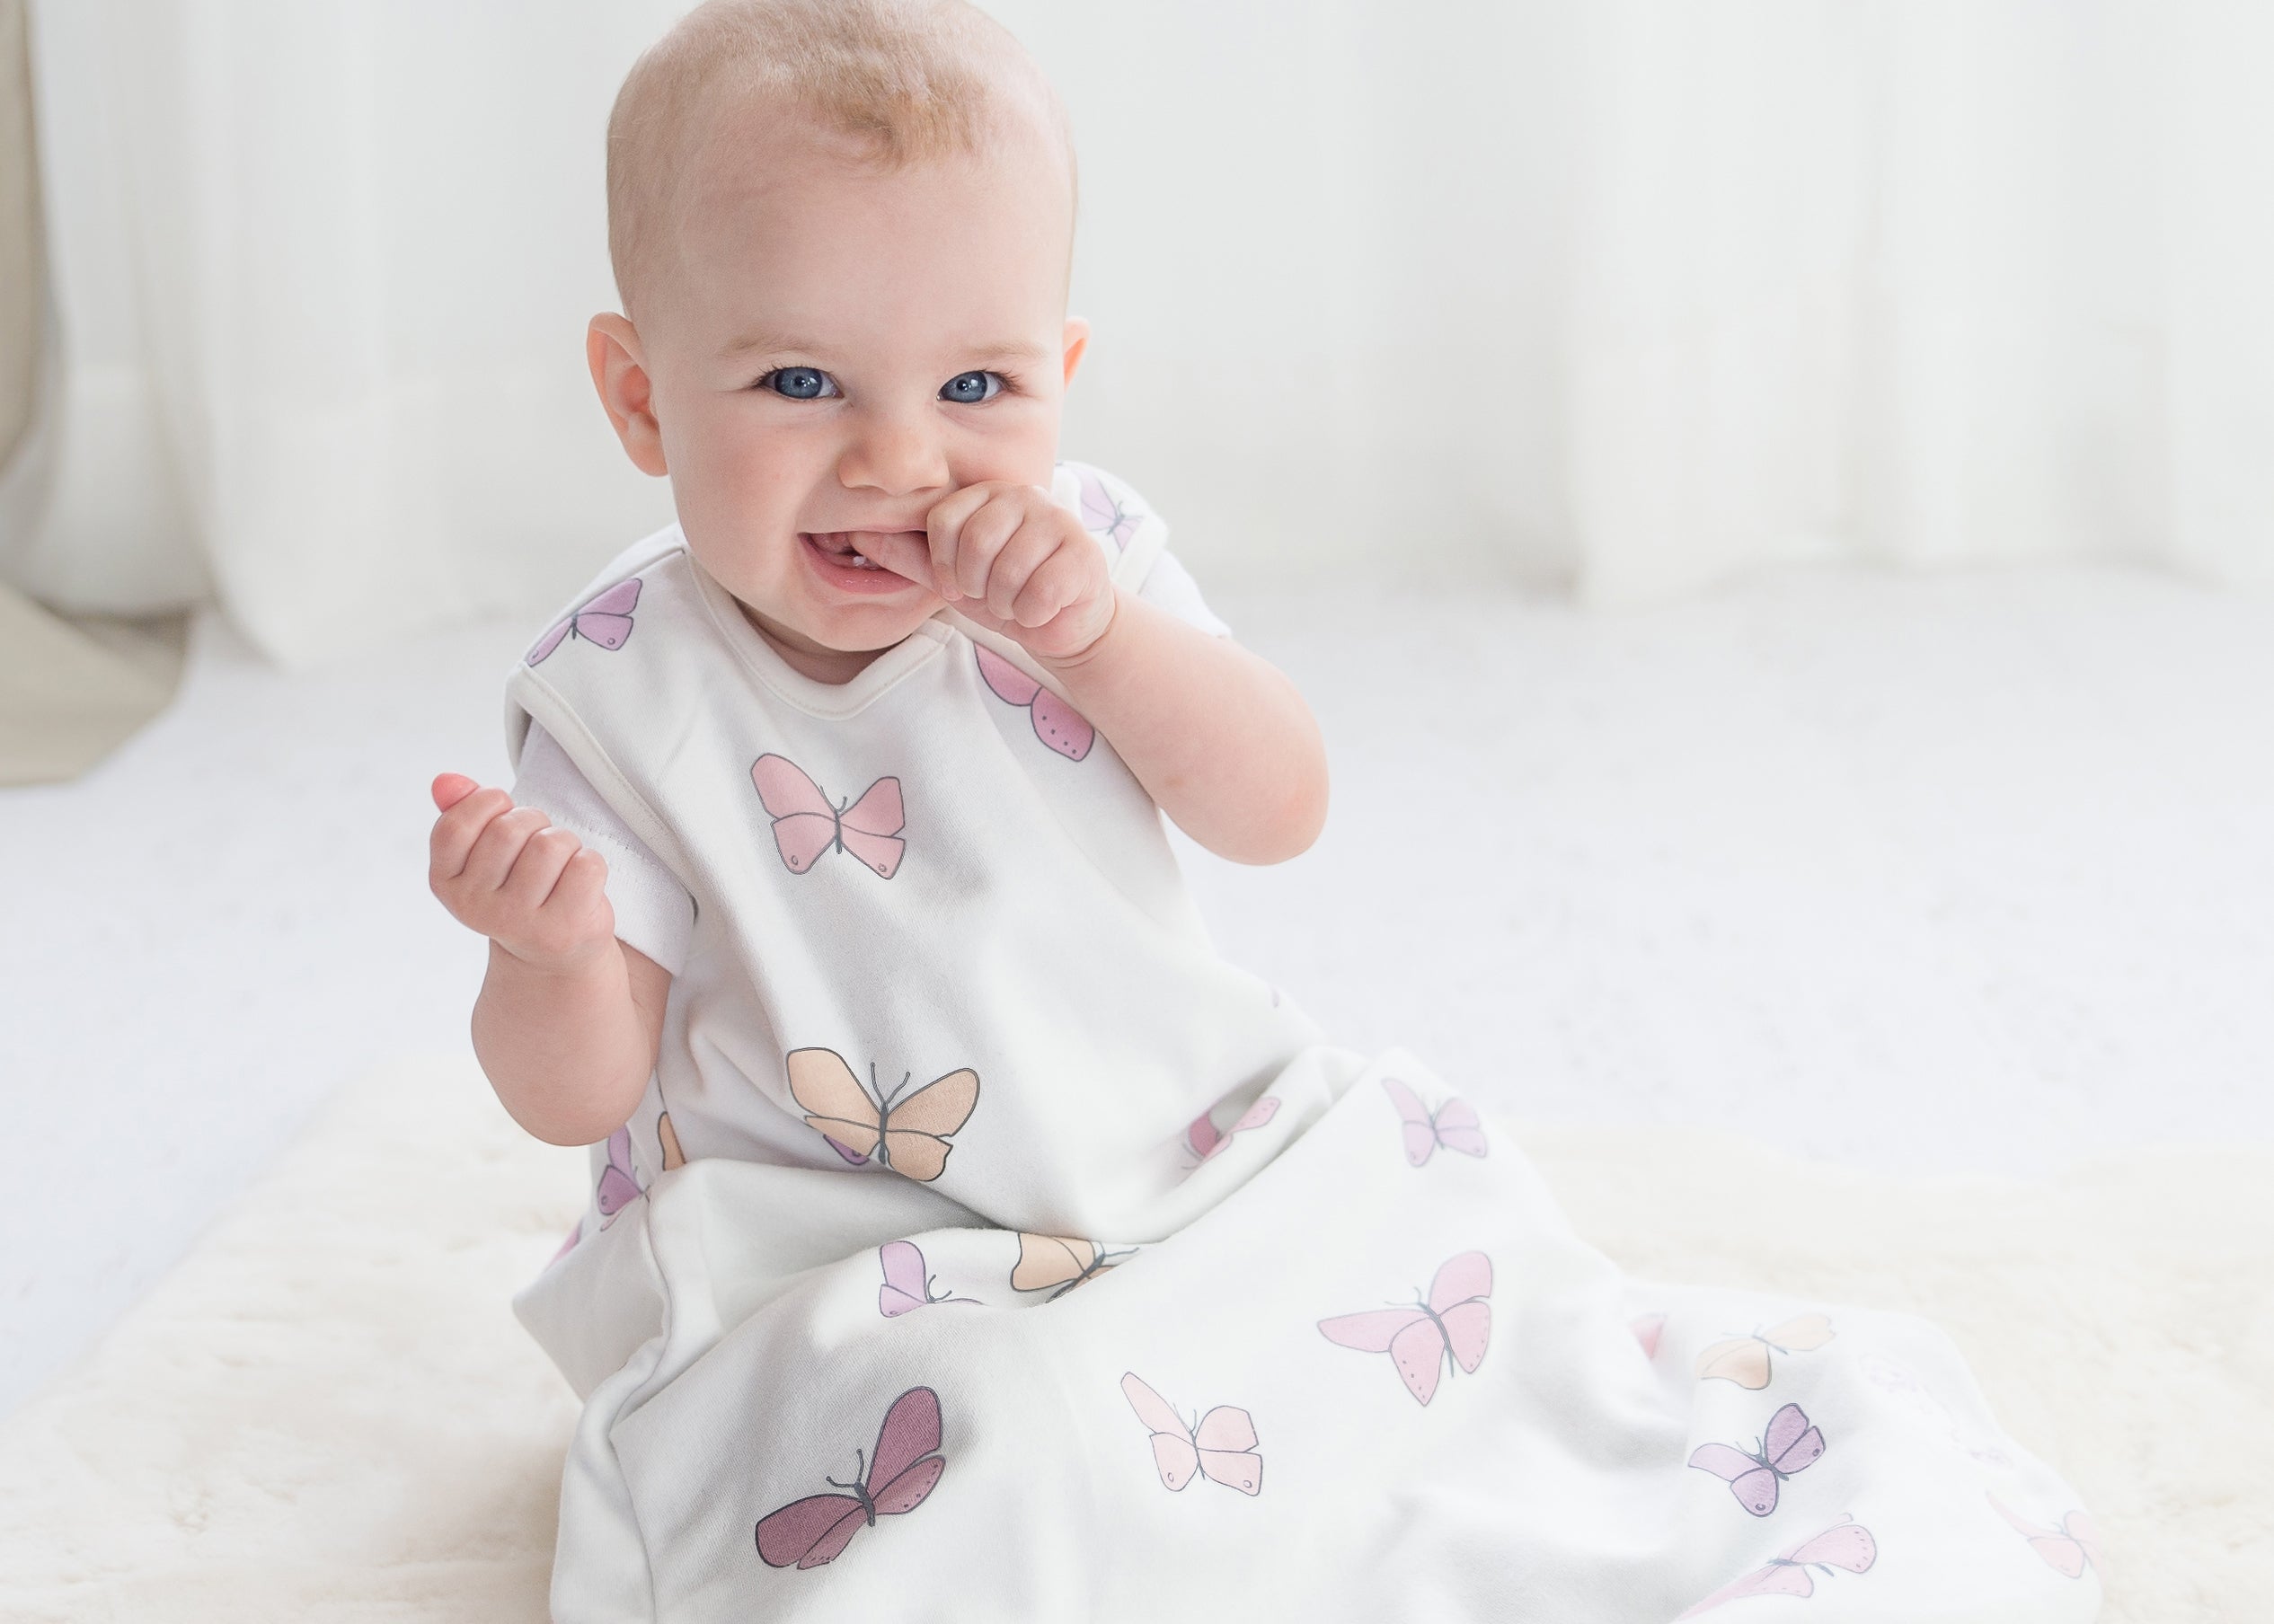 A Parent's Guide to Buying Organic Cotton Clothes - Buy Organic